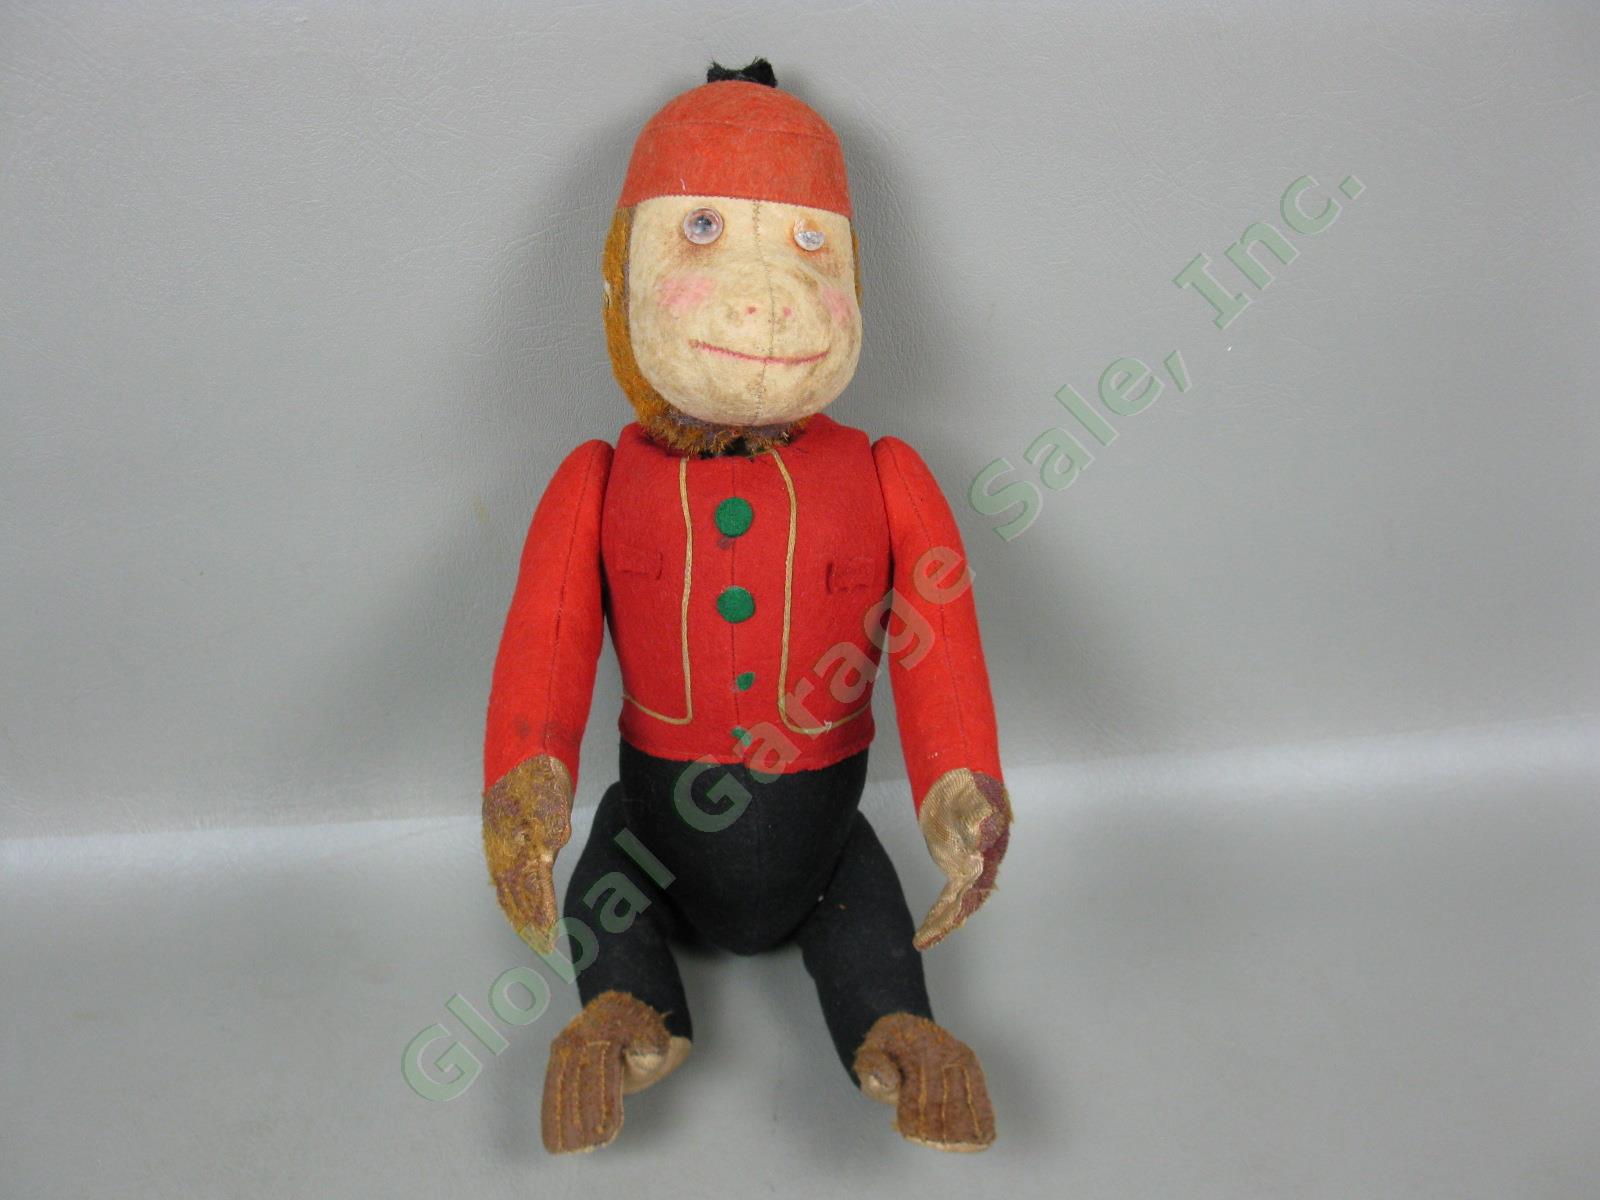 Vtg Antique 1920s Schuco Yes No Jointed Monkey Toy W/ Red Bellhop Uniform Works